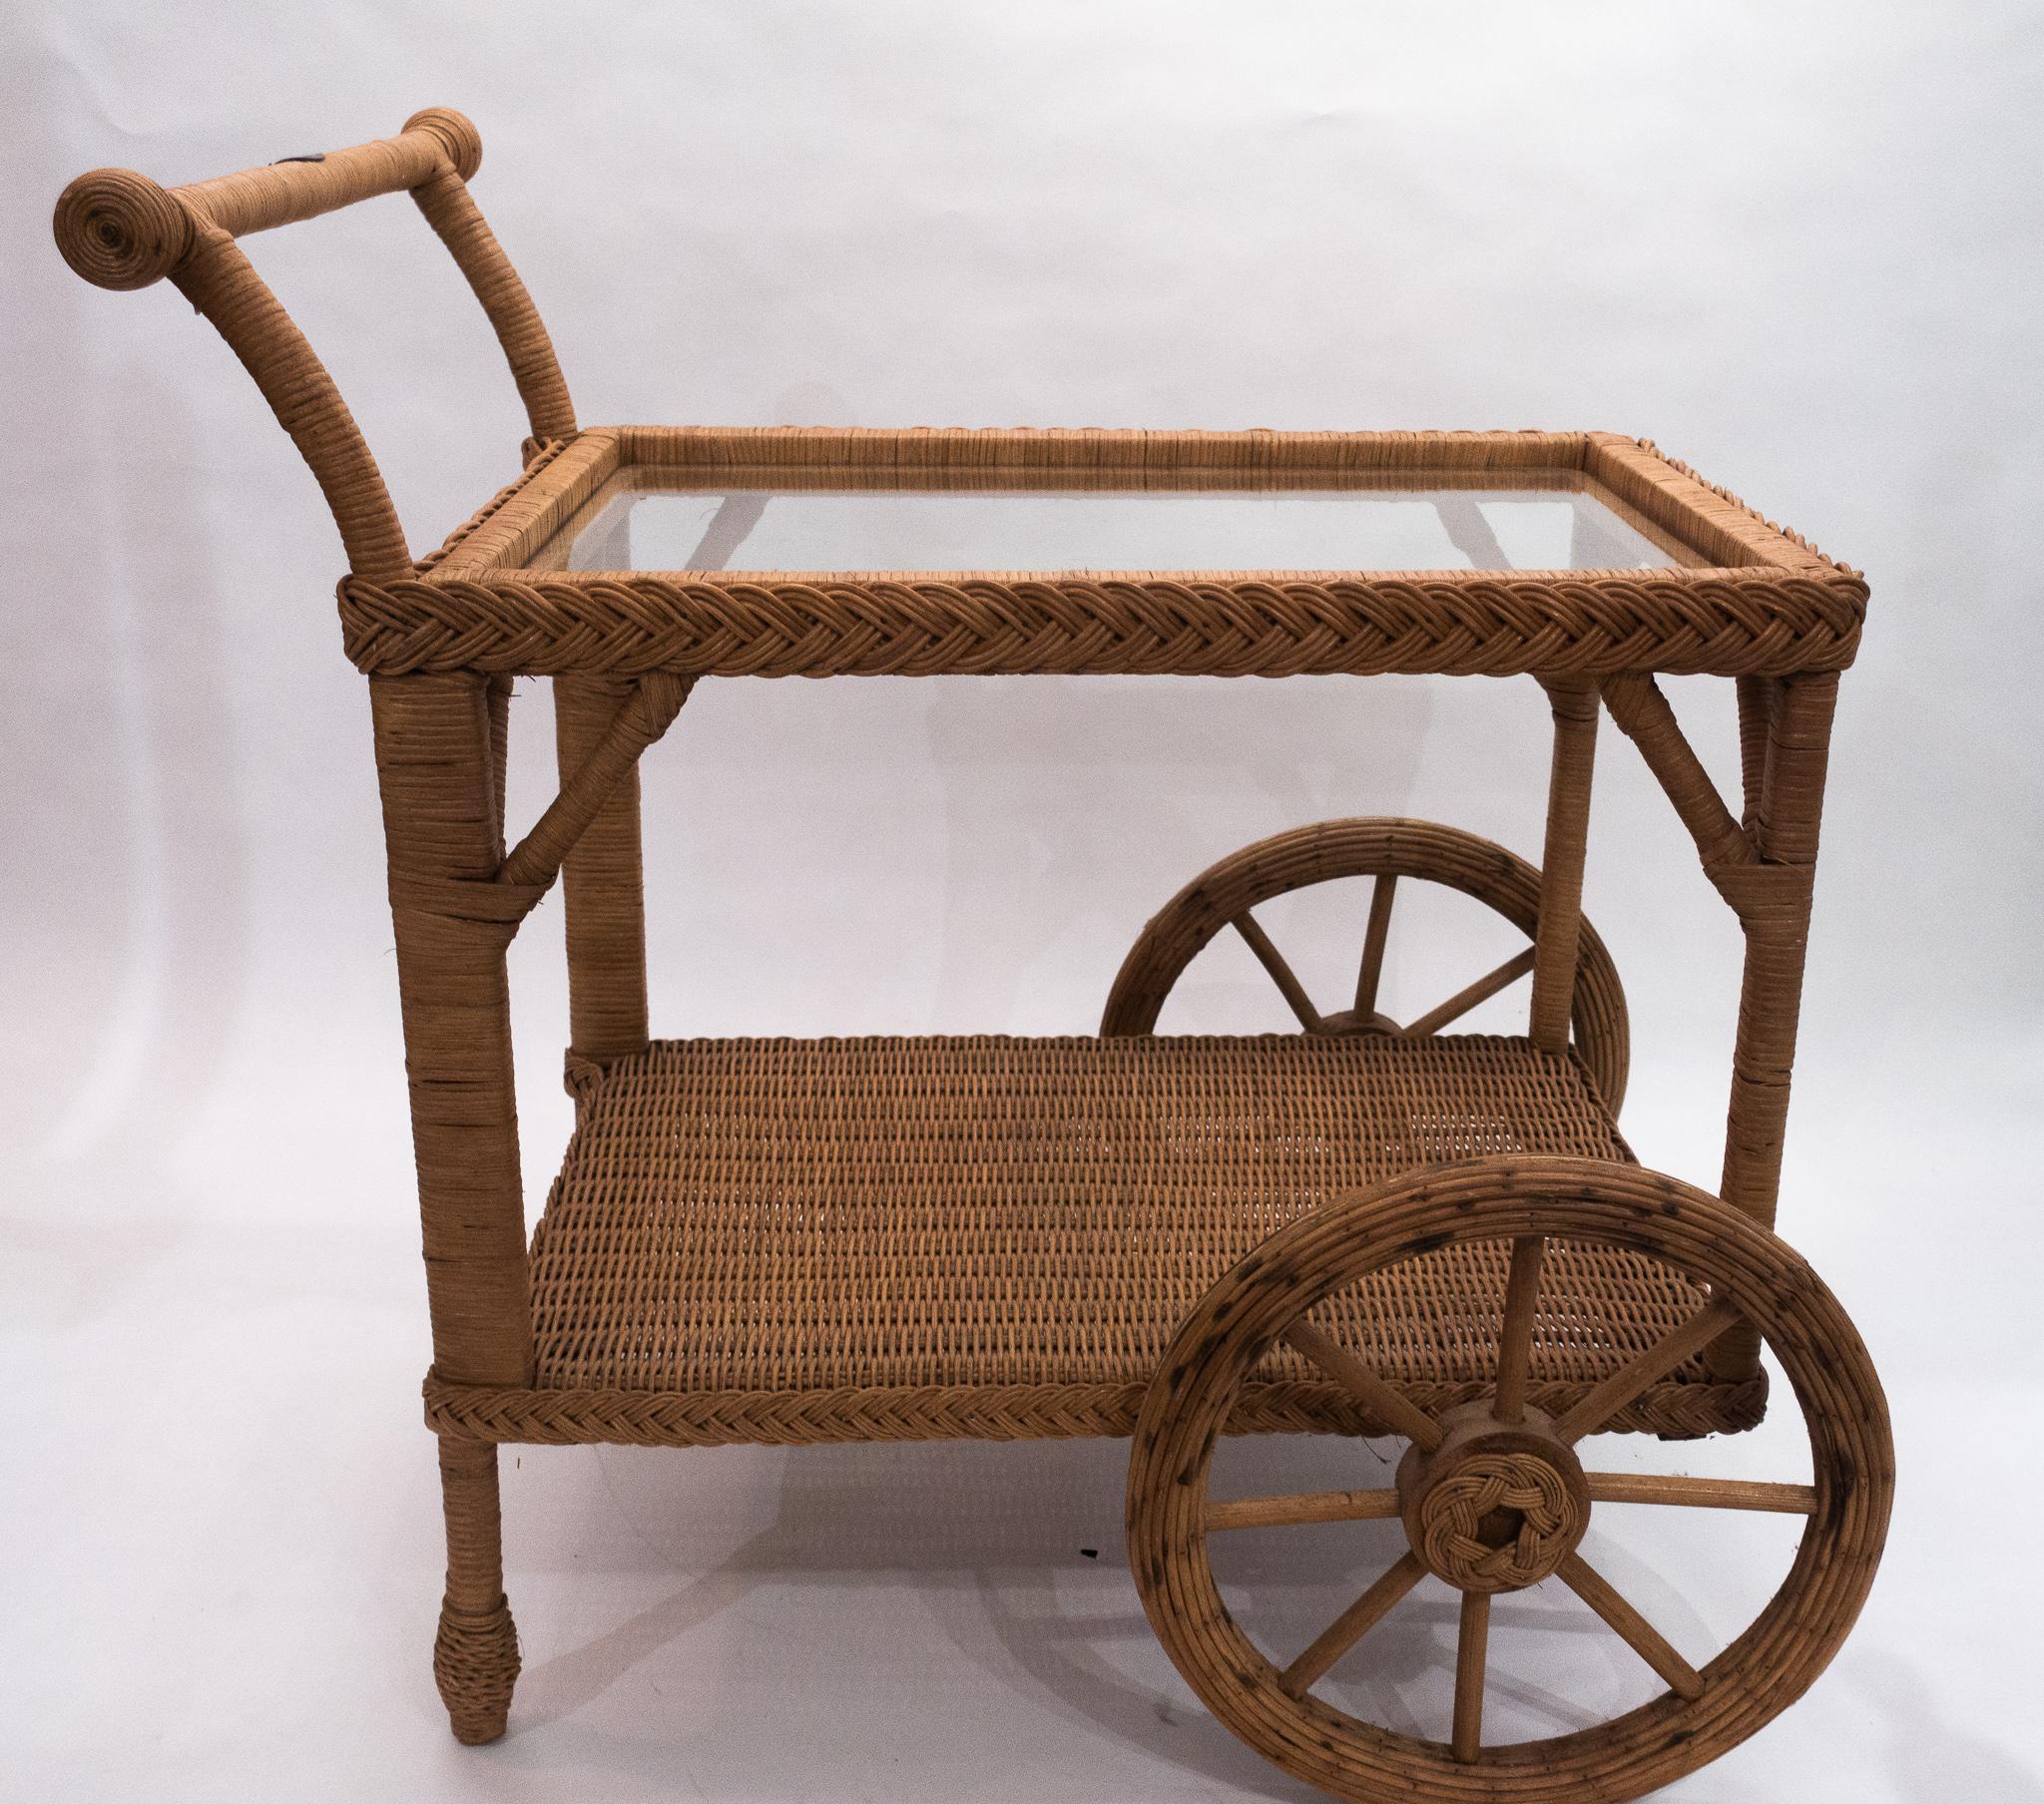 An absolutely beautiful, intricately handwoven wicker tea cart. An authentic piece designed for 